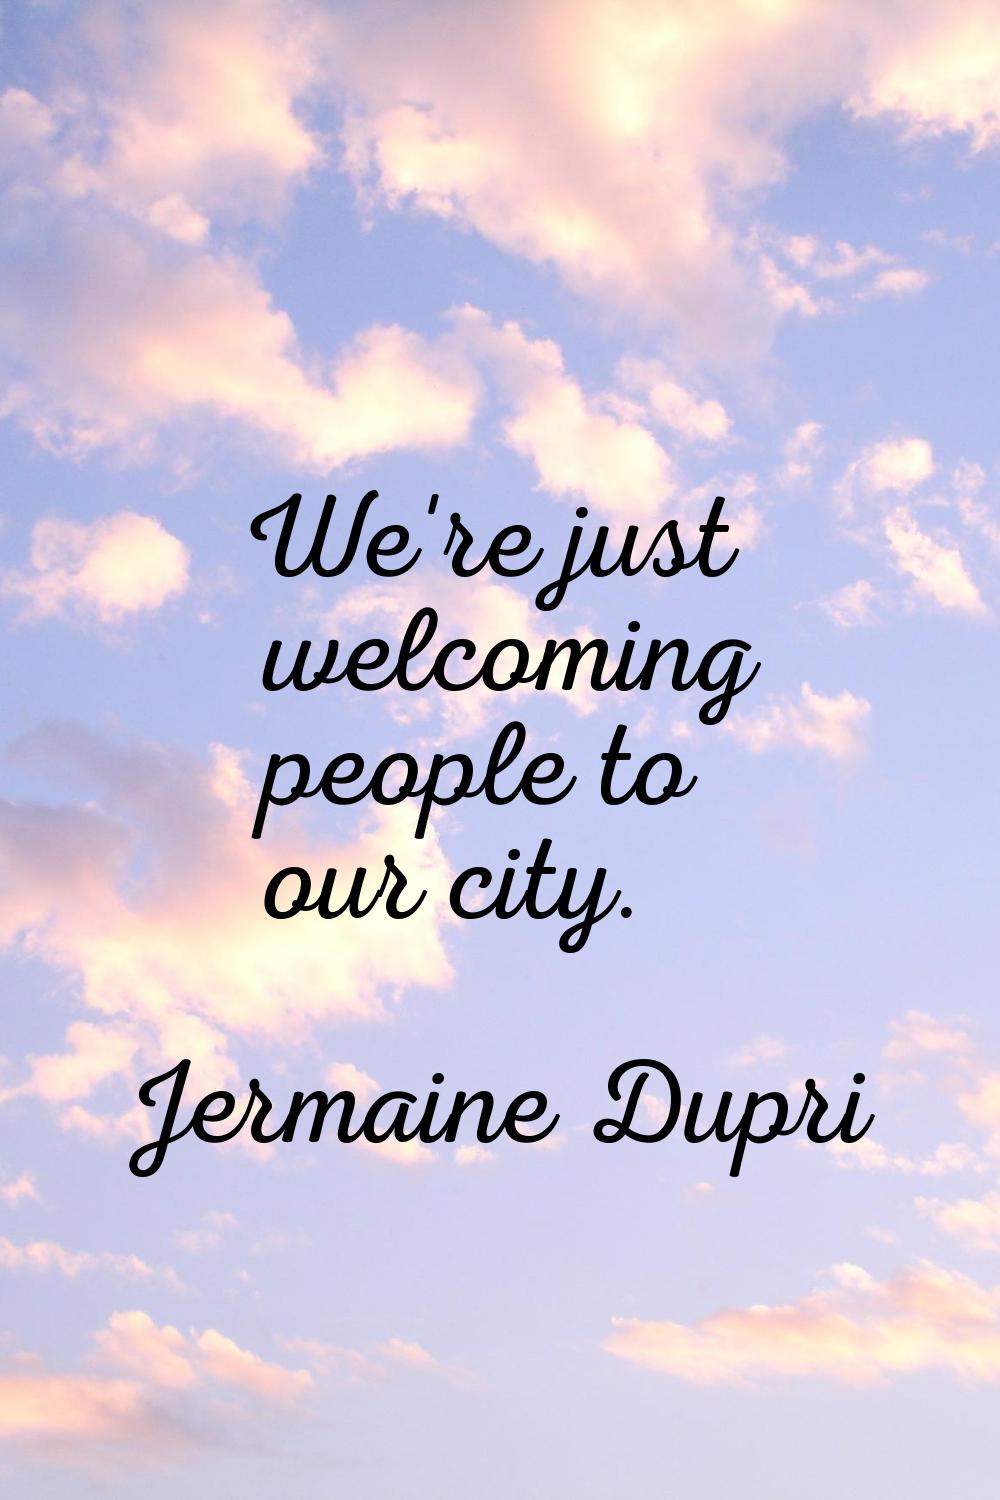 We're just welcoming people to our city.